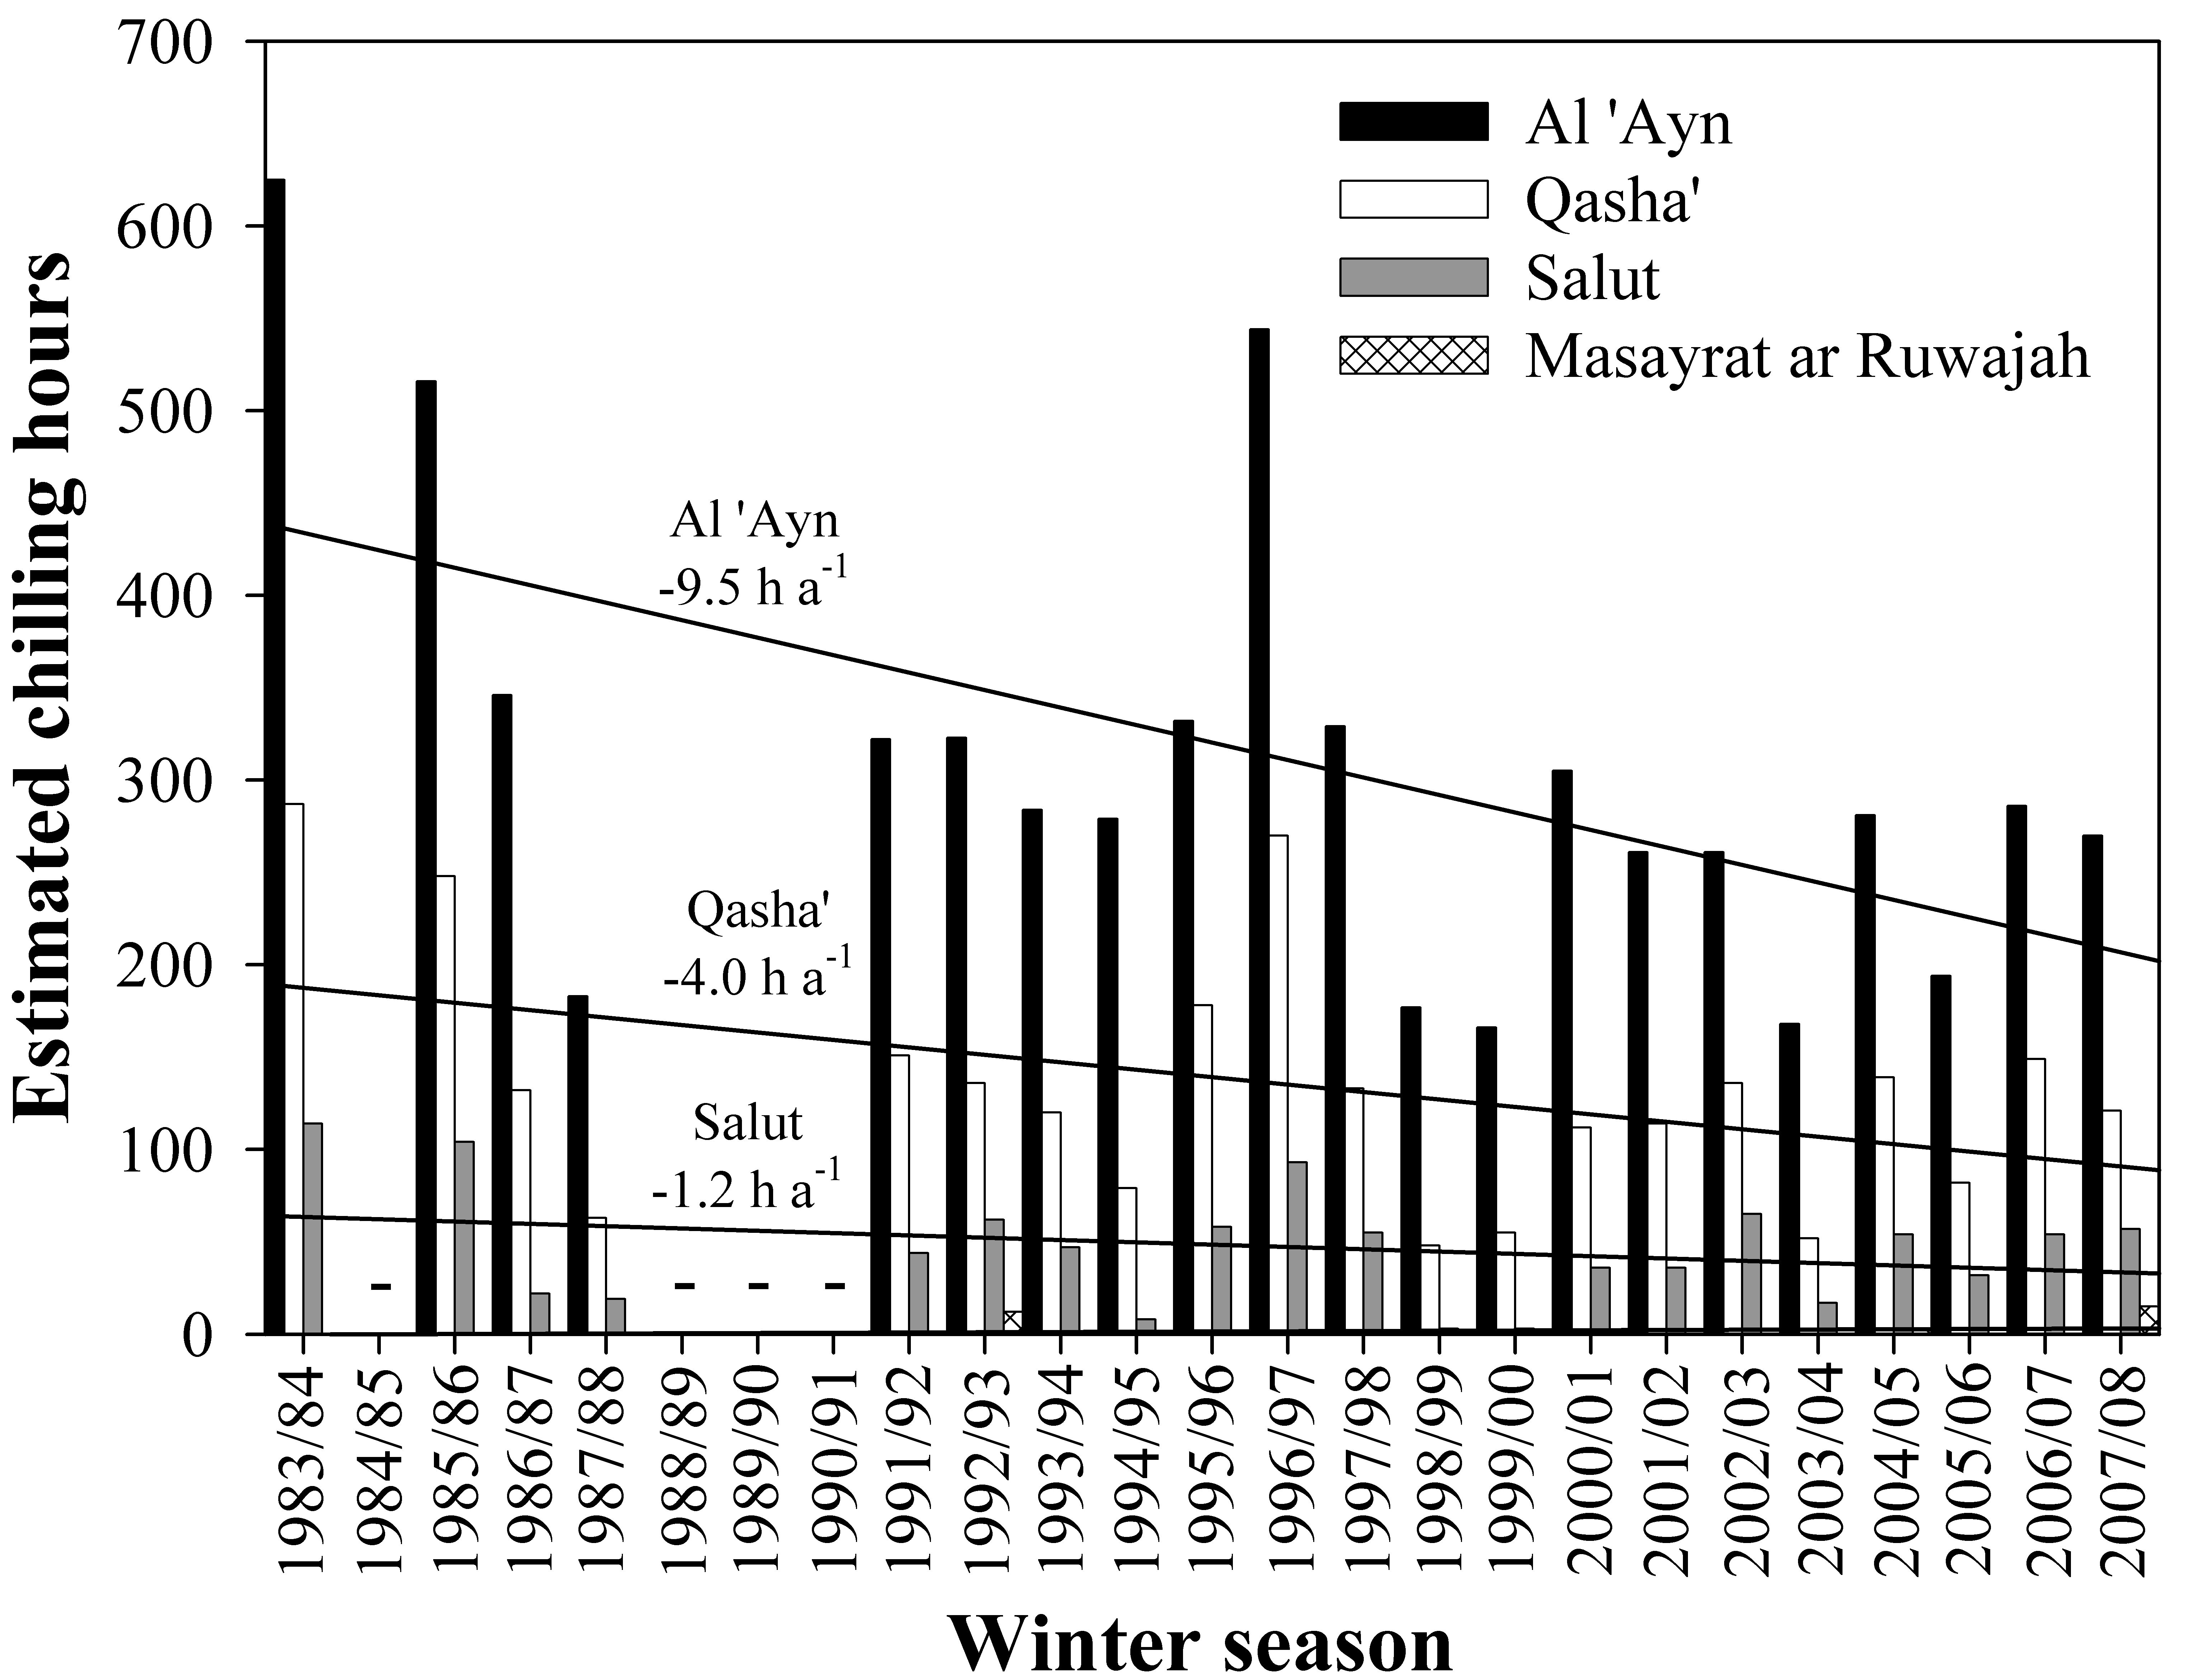 Chill dynamics between 1983 and 2007, Al Jabal Al Akhdar, Oman (- indicates years with insufficient data coverage)